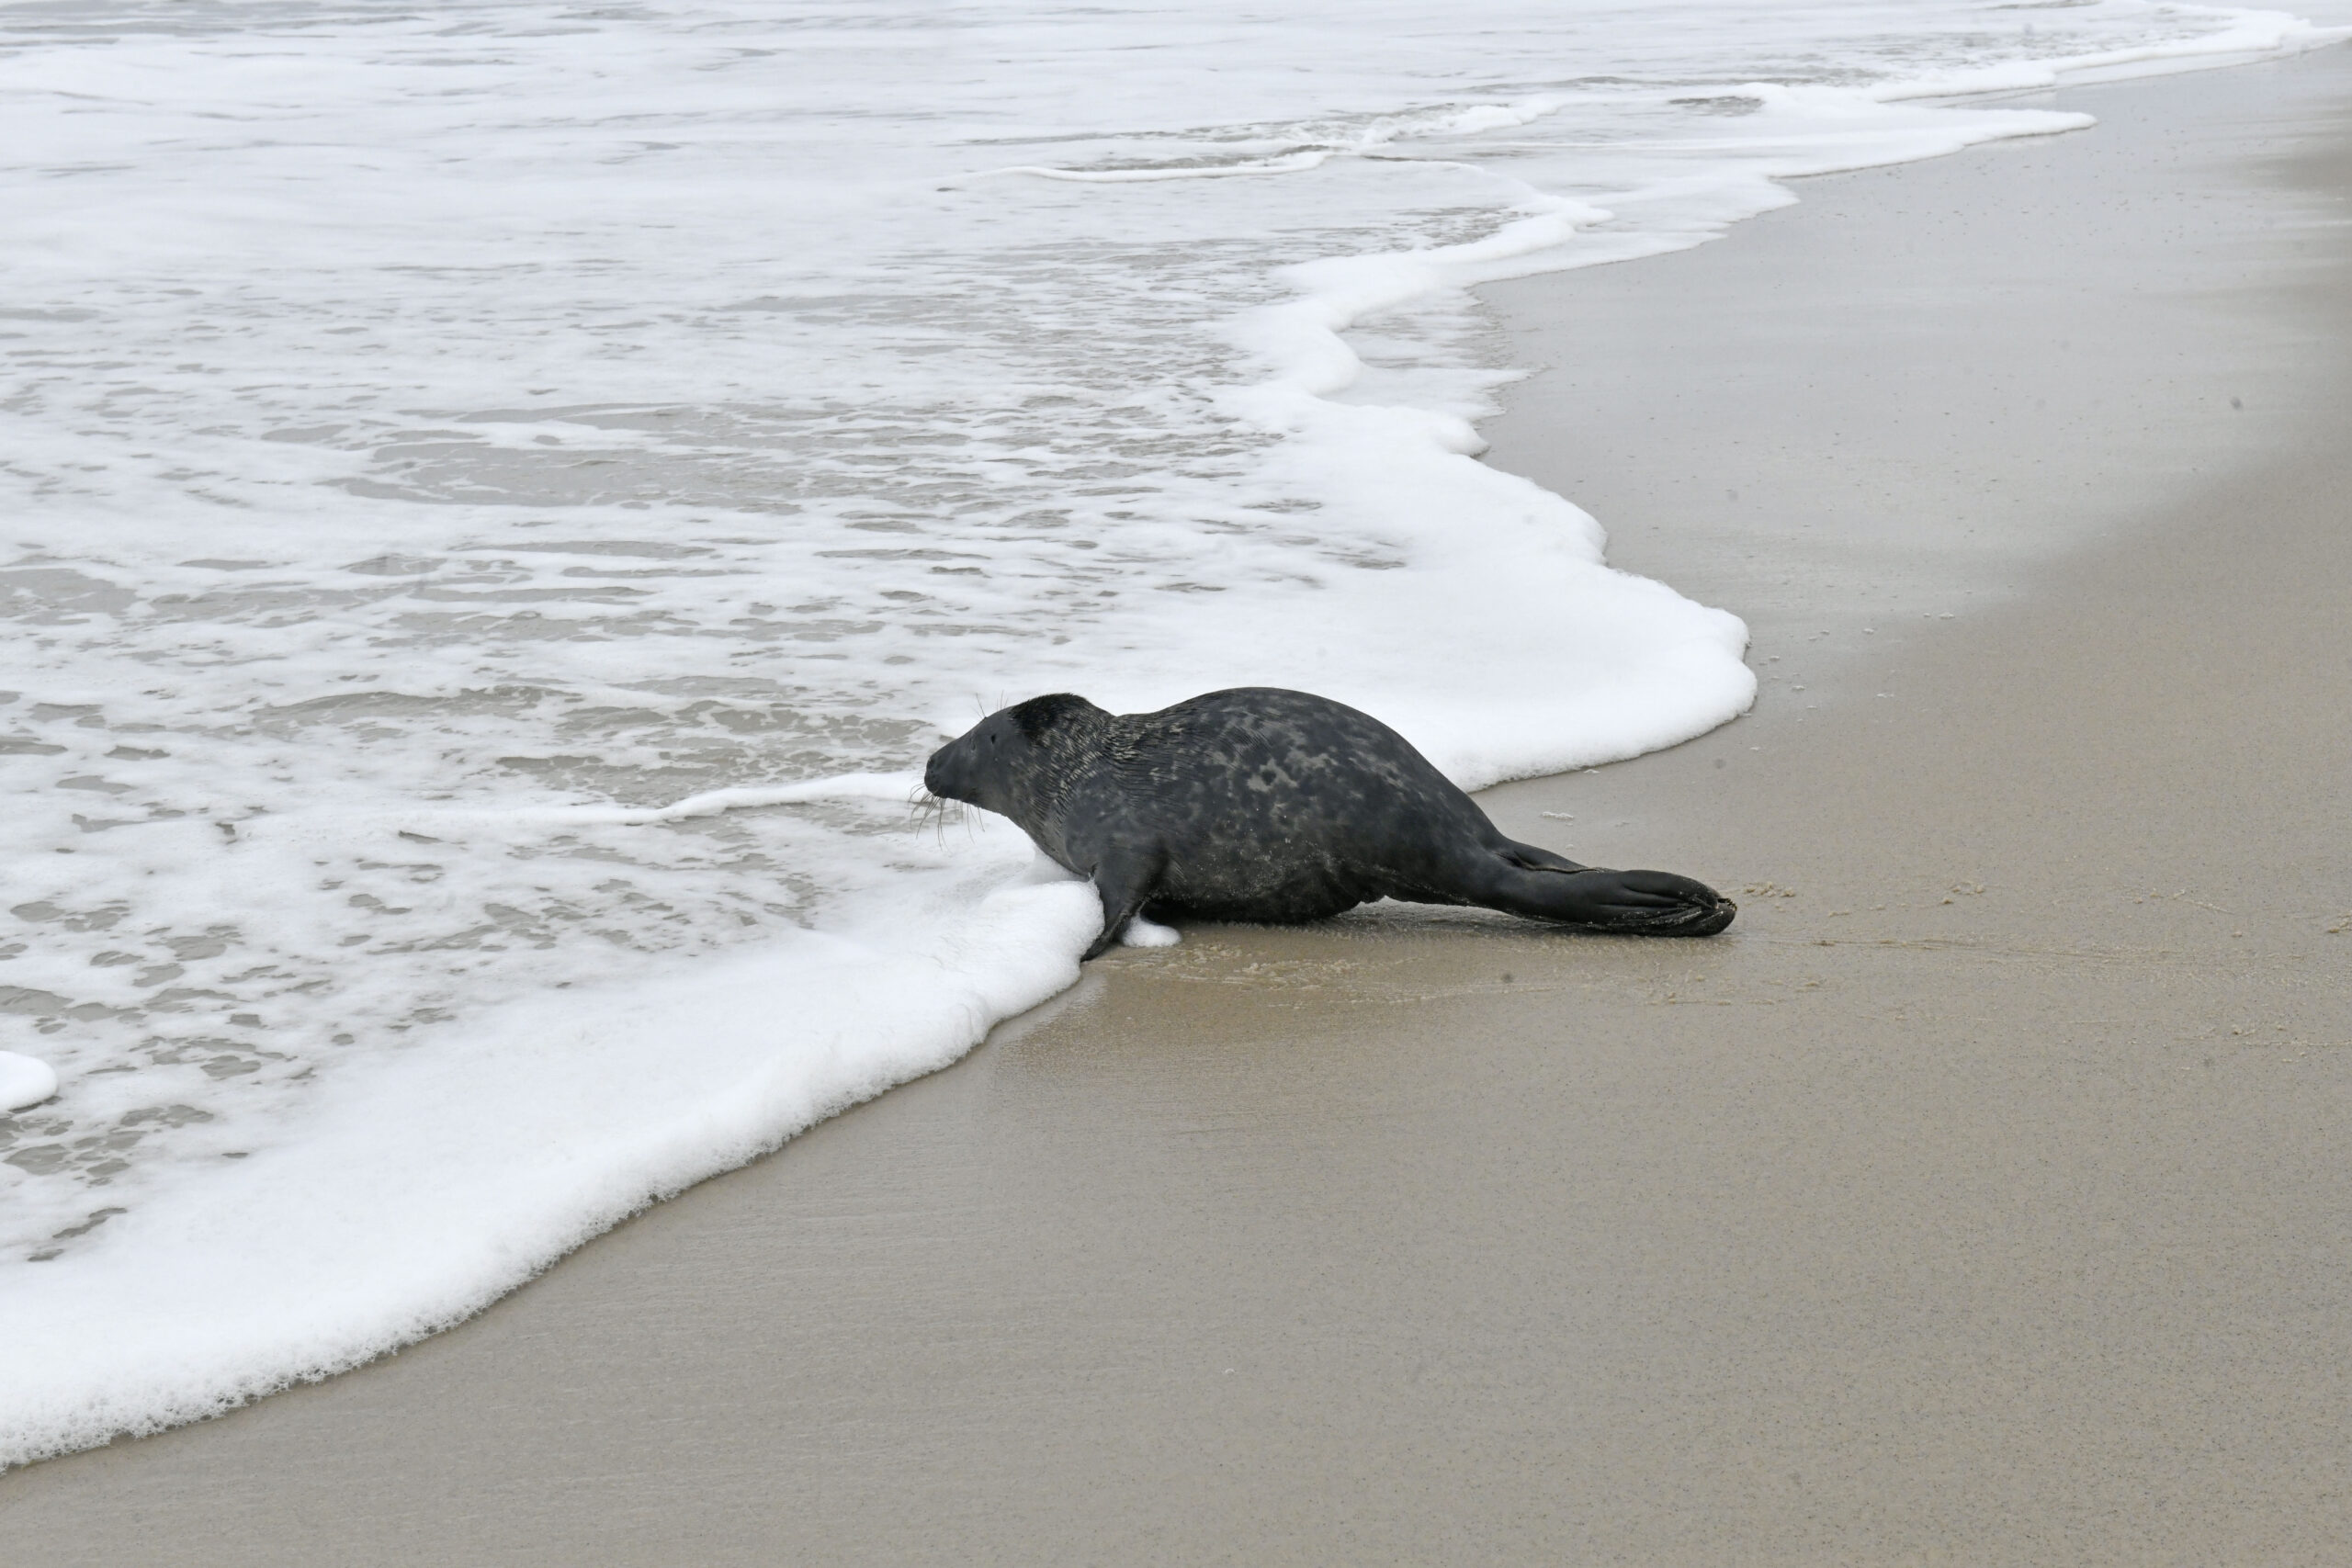 Peconic, the male gray seal pup found wandering near the traffic circle in Riverhead was released on Friday morning at Tiana Beach in Hampton Bays.